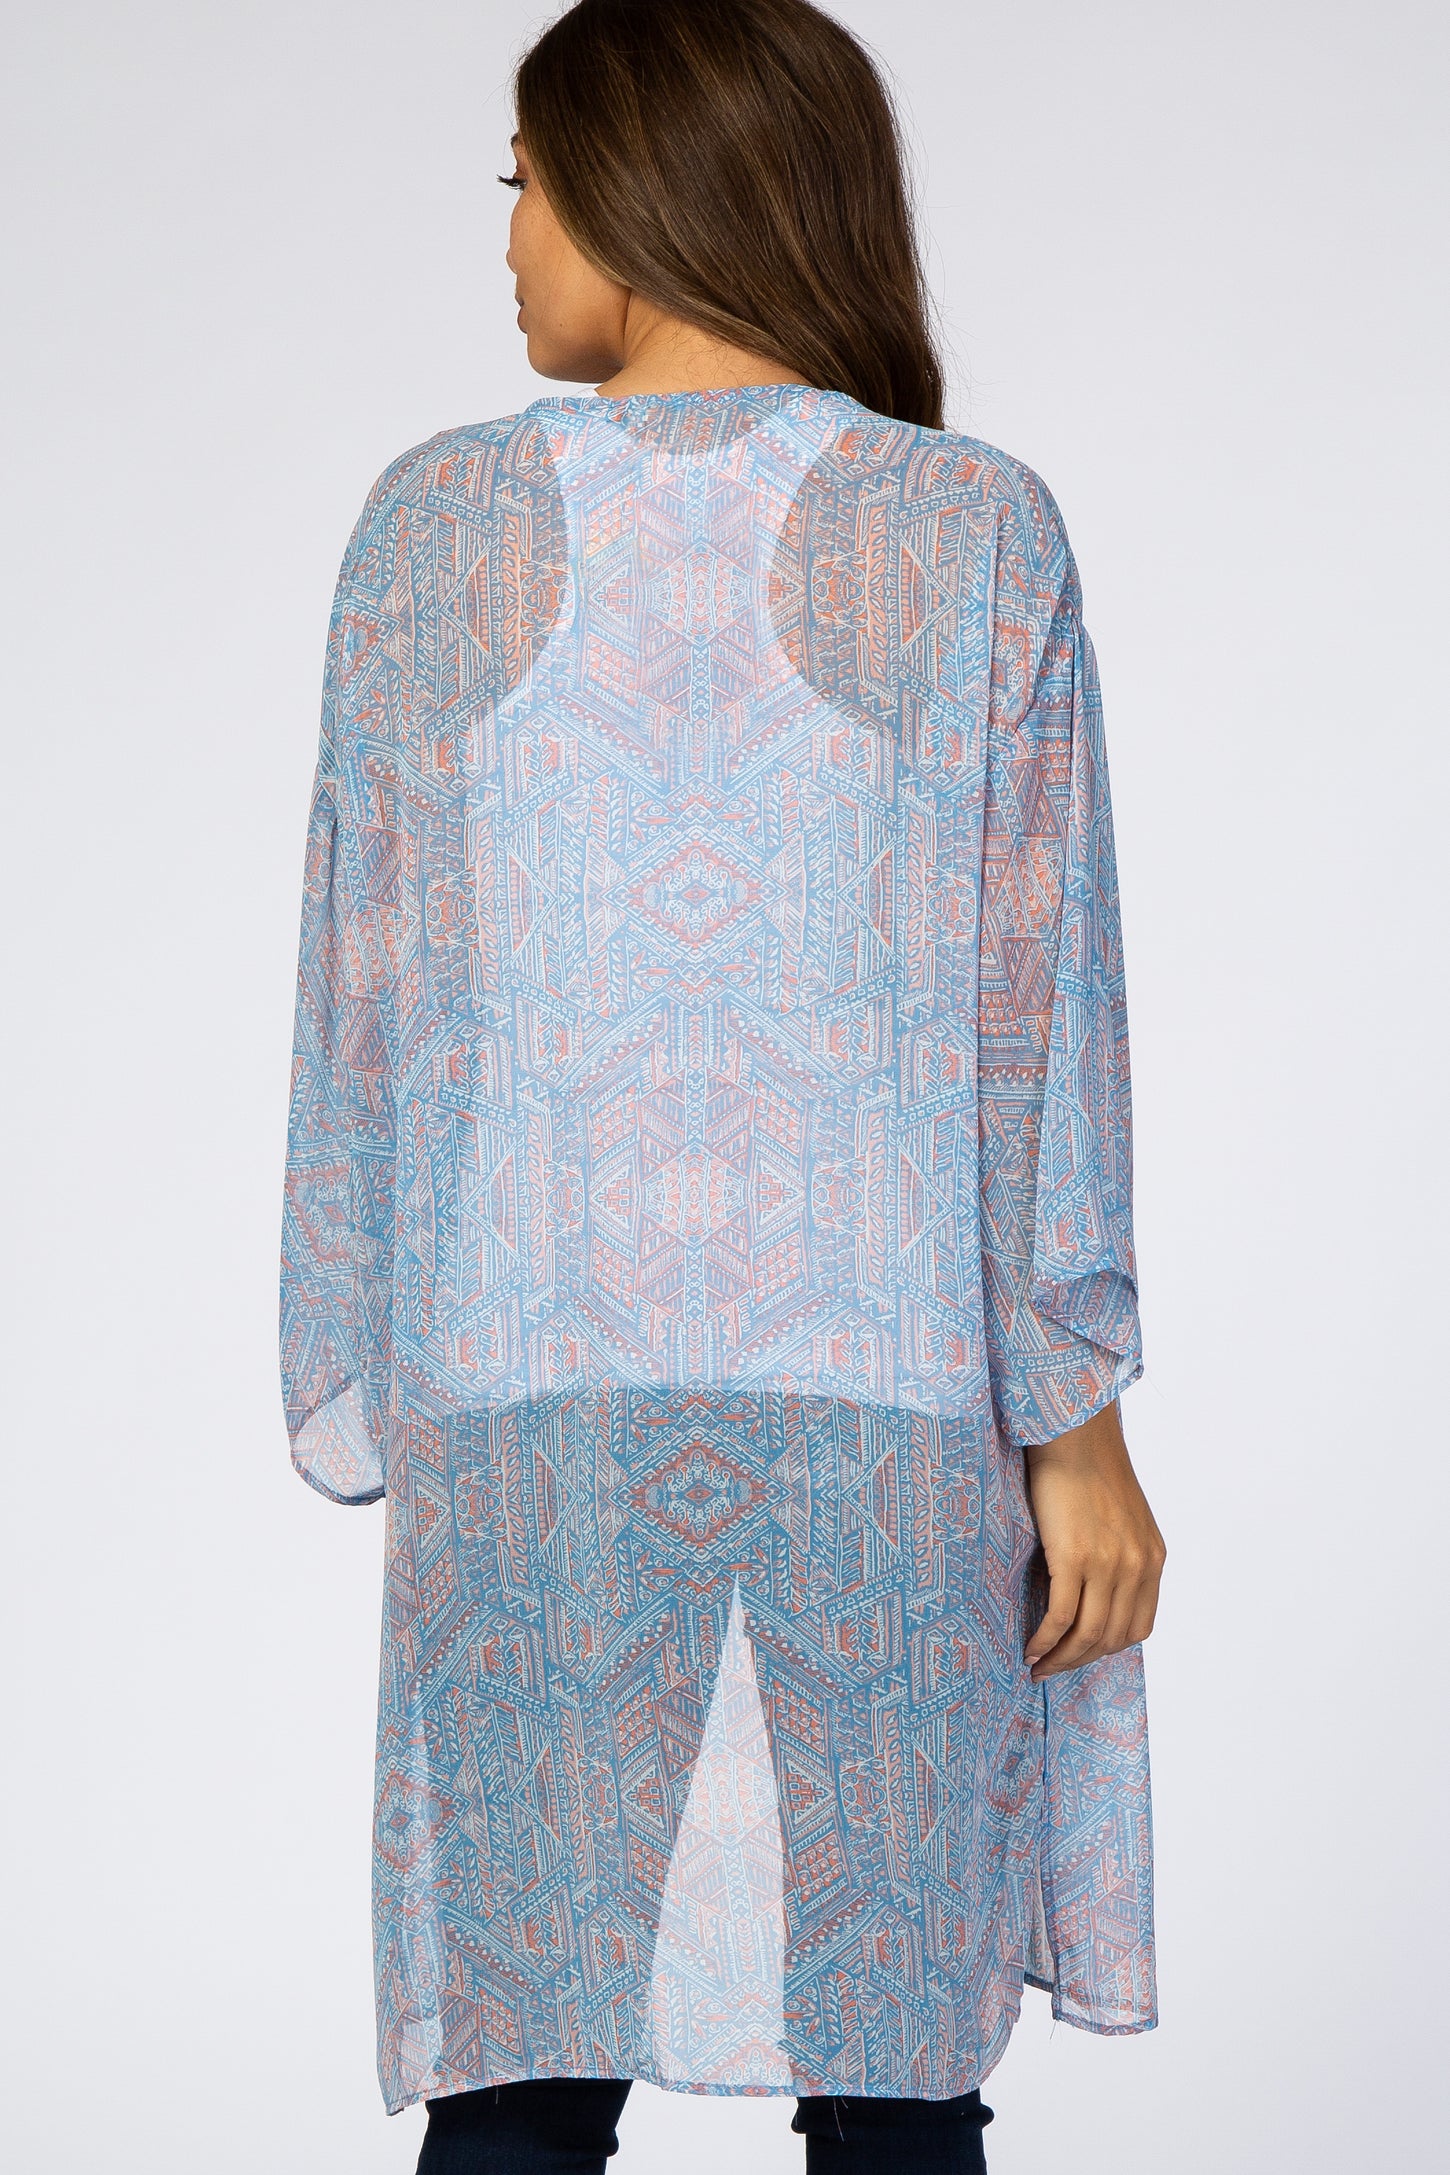 Blue Printed 3/4 Sleeve Maternity Coverup